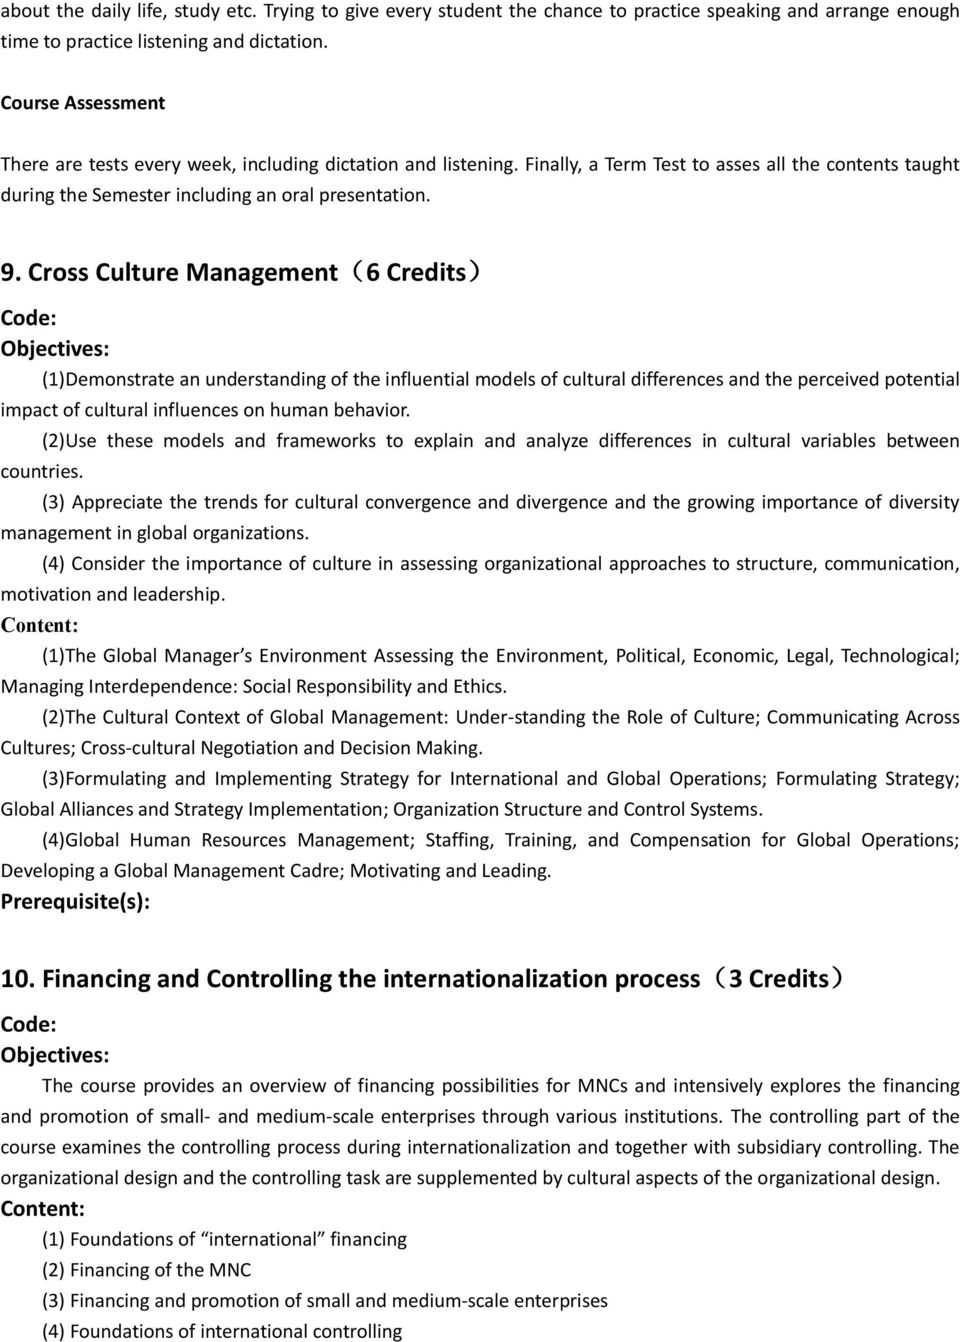 Cross Culture Management(6 Credits) Code: (1)Demonstrate an understanding of the influential models of cultural differences and the perceived potential impact of cultural influences on human behavior.